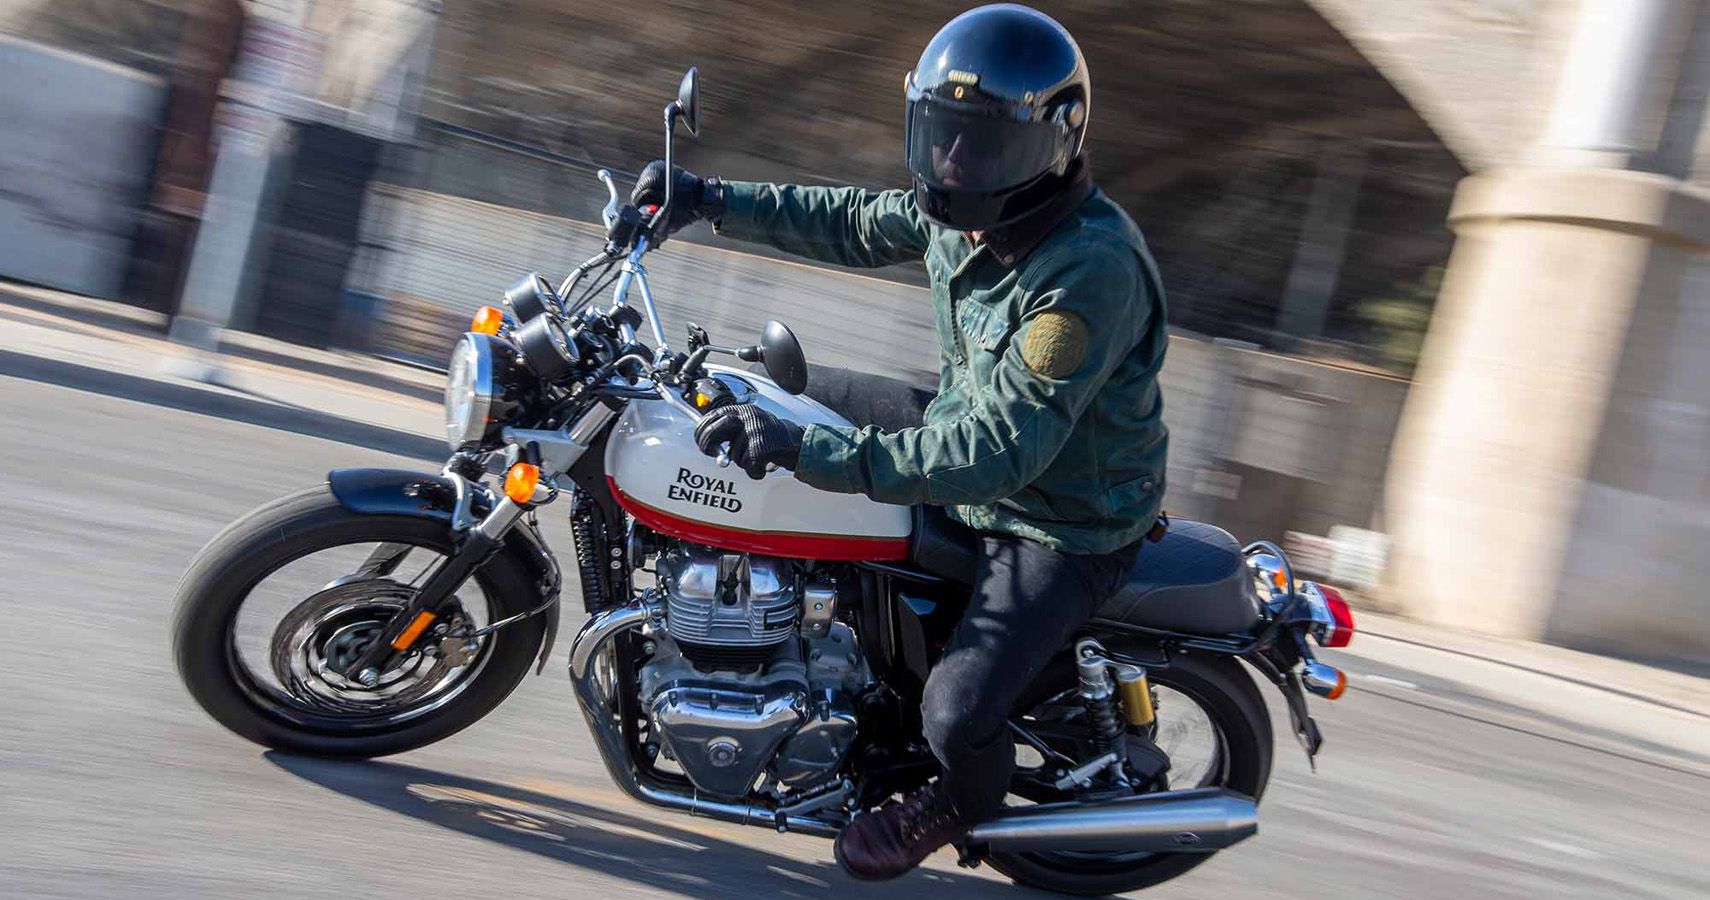 Why The Royal Enfield Interceptor 650 Is The Best Motorcycle Under $5,000